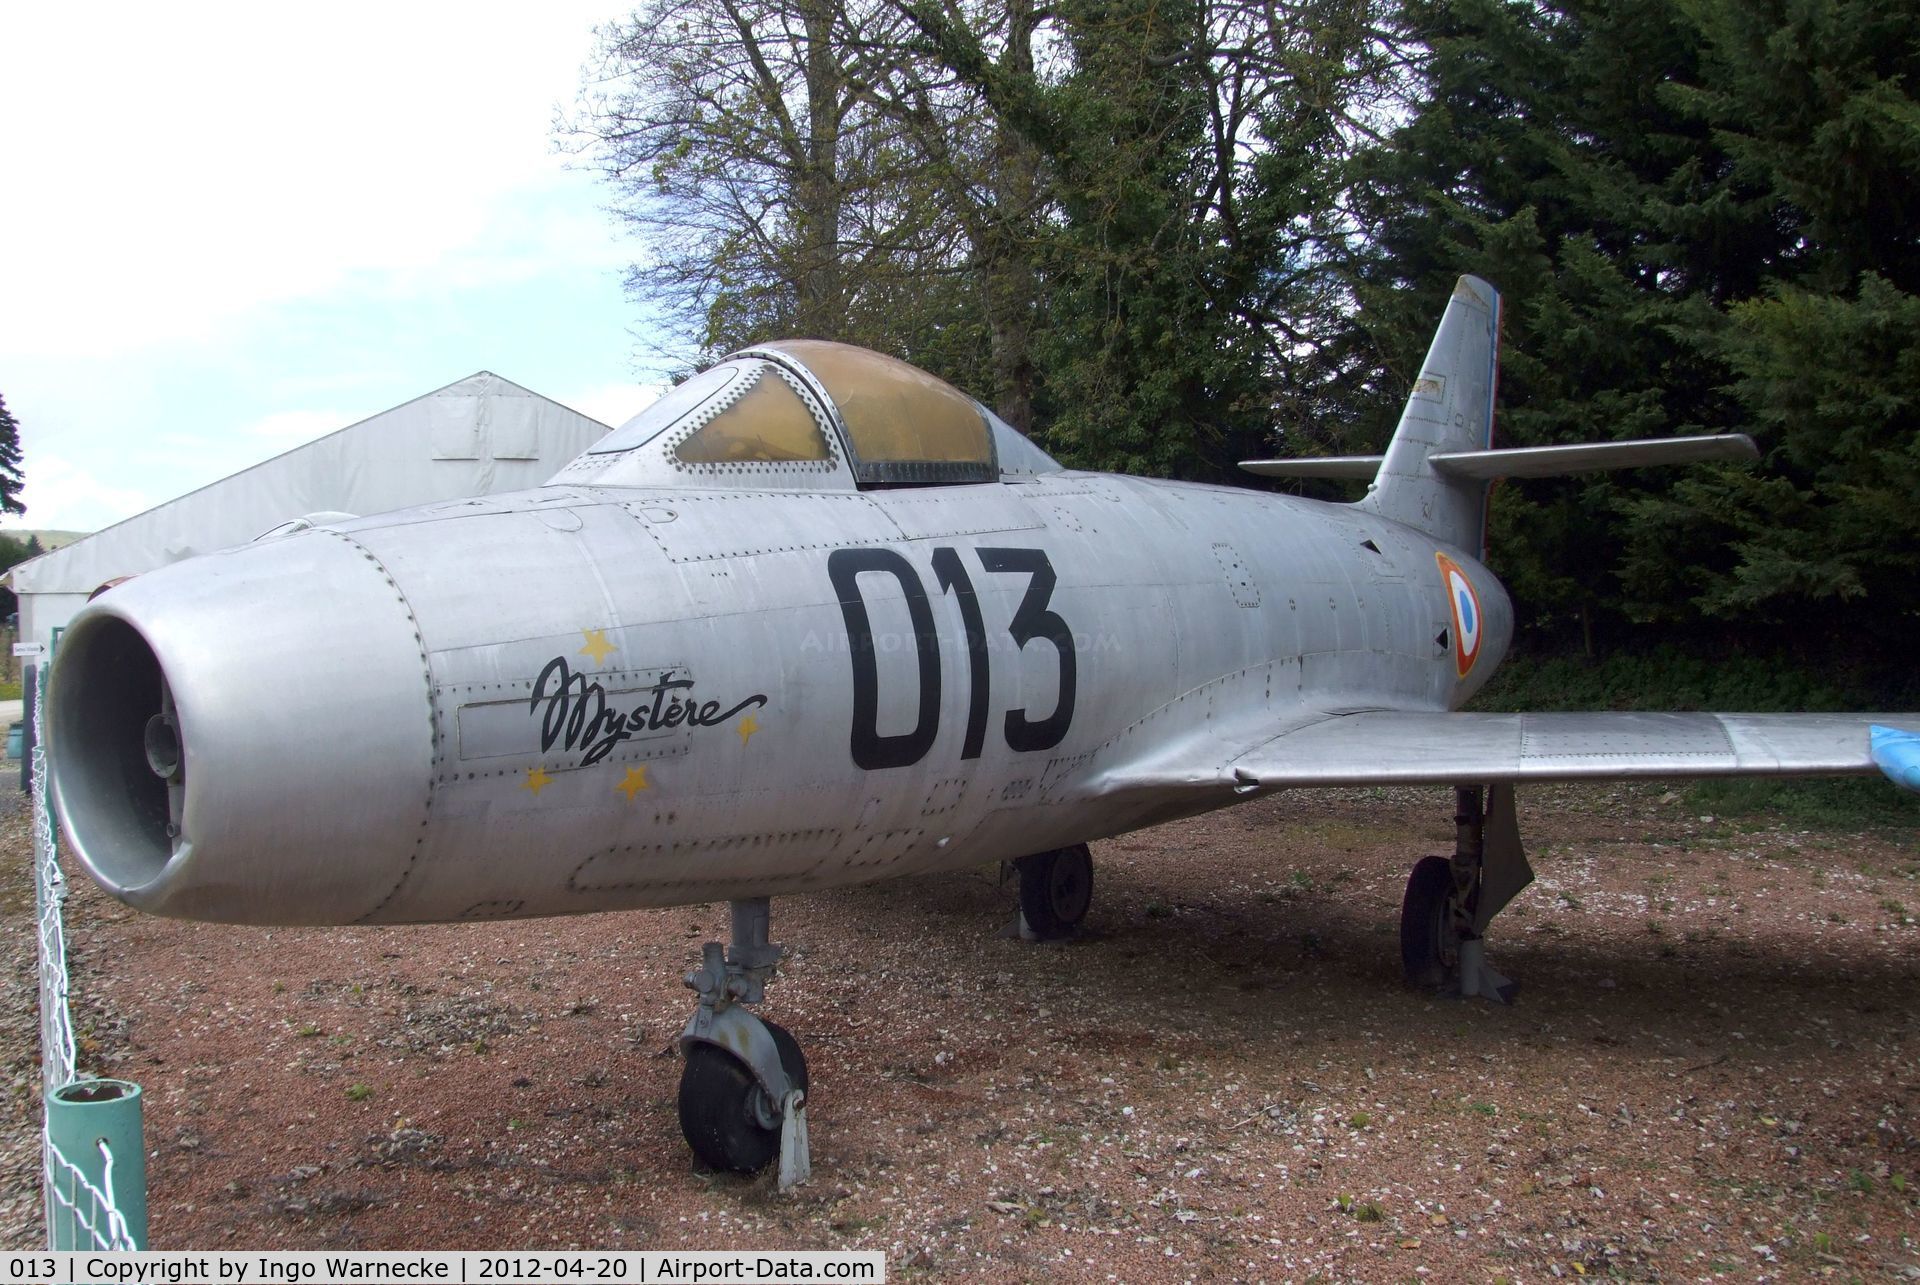 013, Dassault Mystere IIC C/N 013, Dassault Mystere II C at the Musee de l'Aviation du Chateau, Savigny-les-Beaune